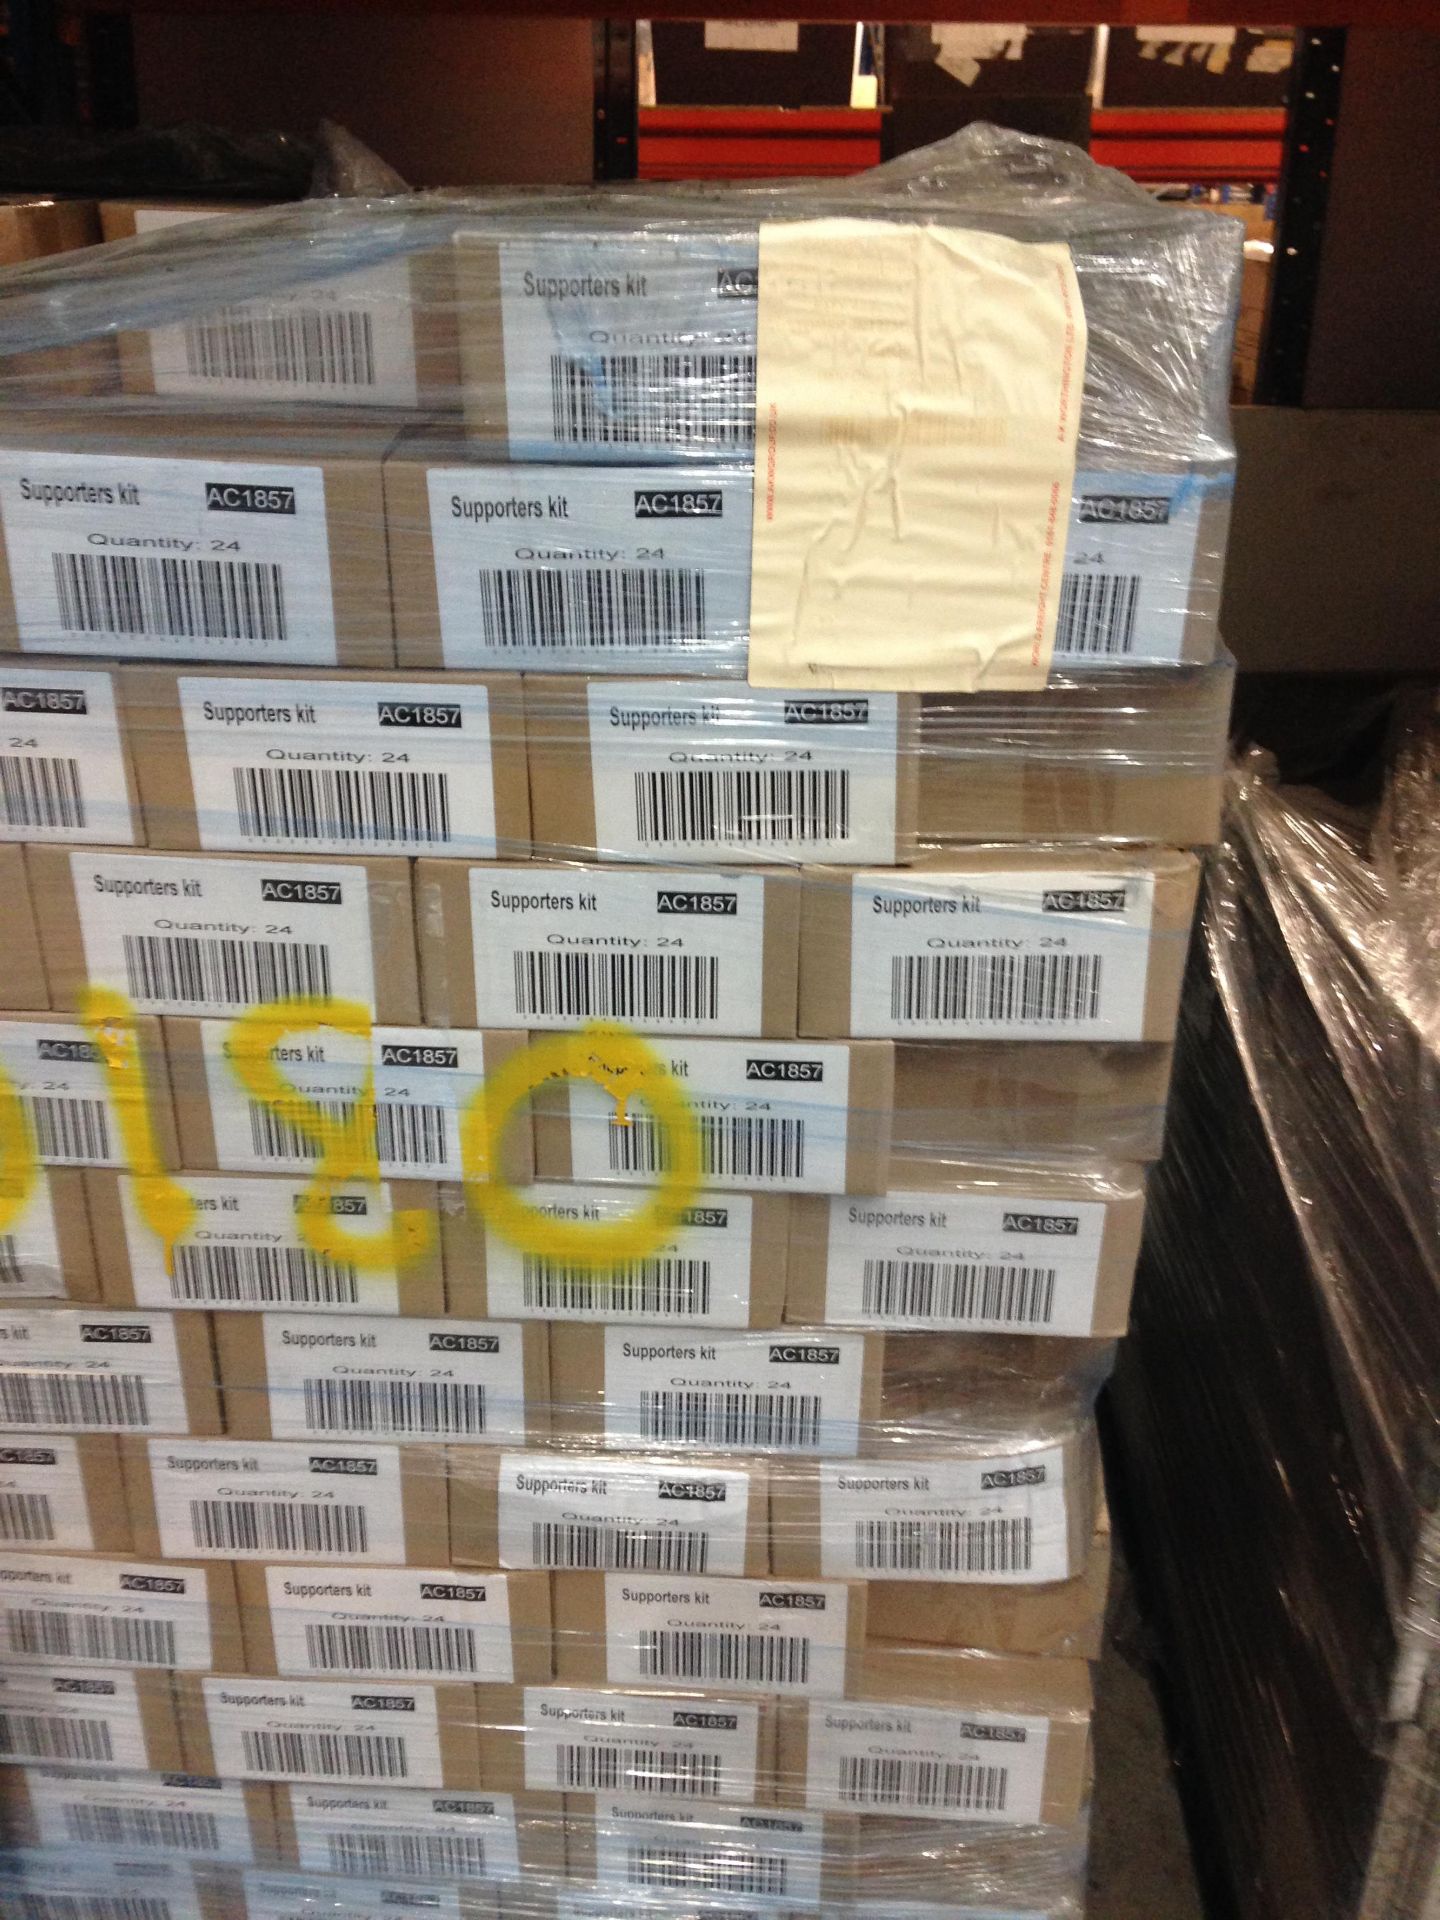 Pallet No- 1058 - Pallet of approx 250 boxes of tax disc holders - 24 per box